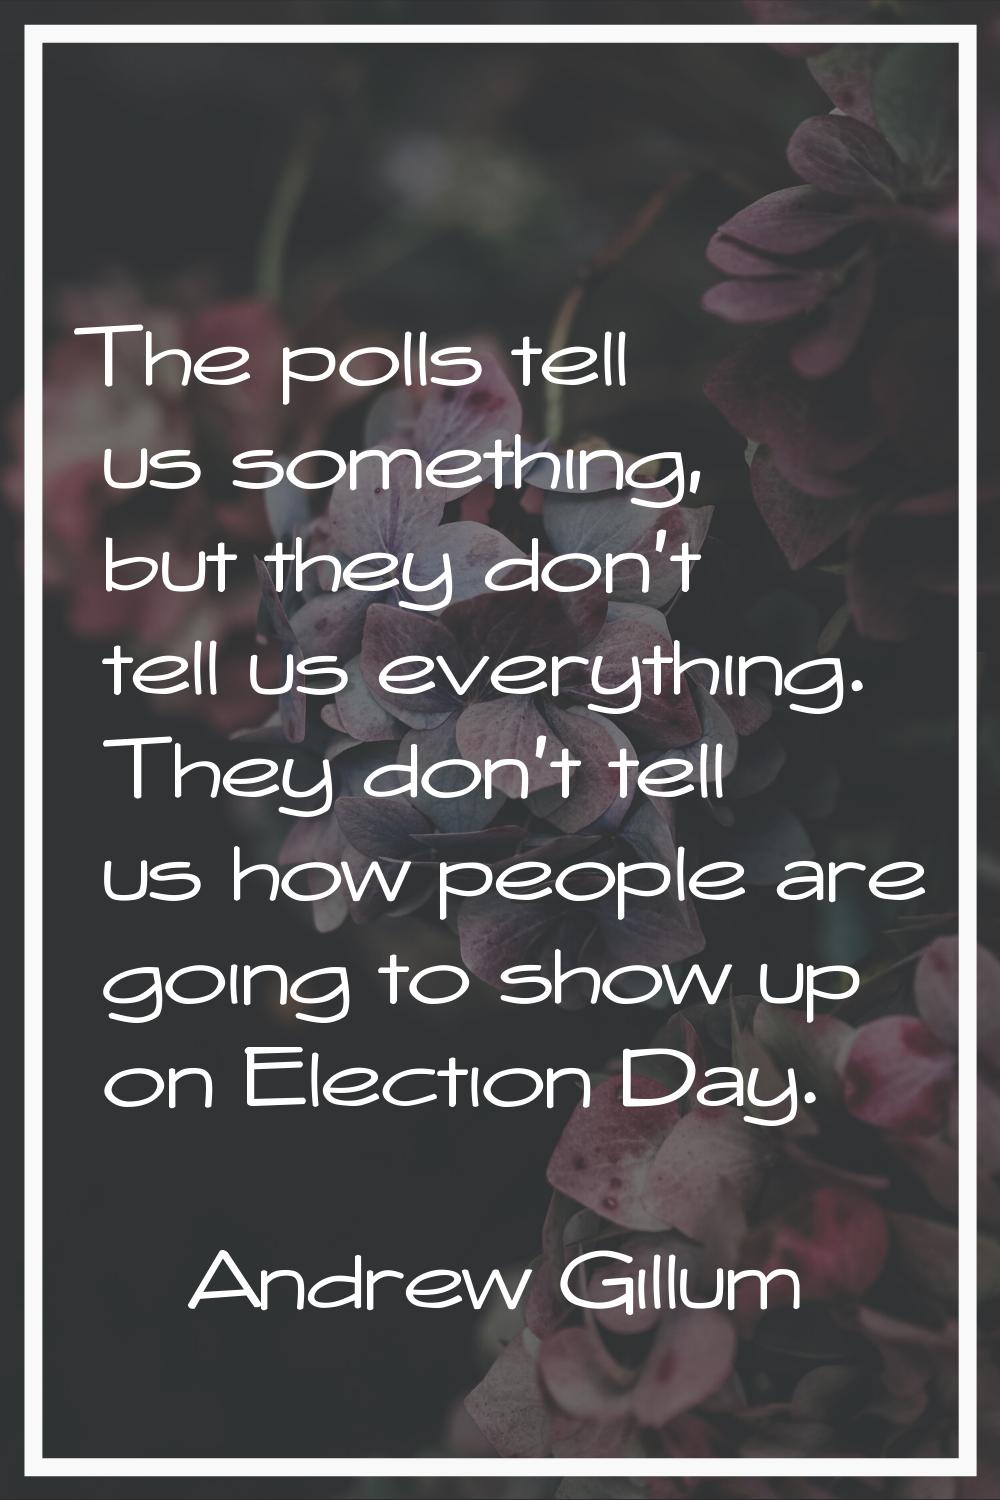 The polls tell us something, but they don't tell us everything. They don't tell us how people are g